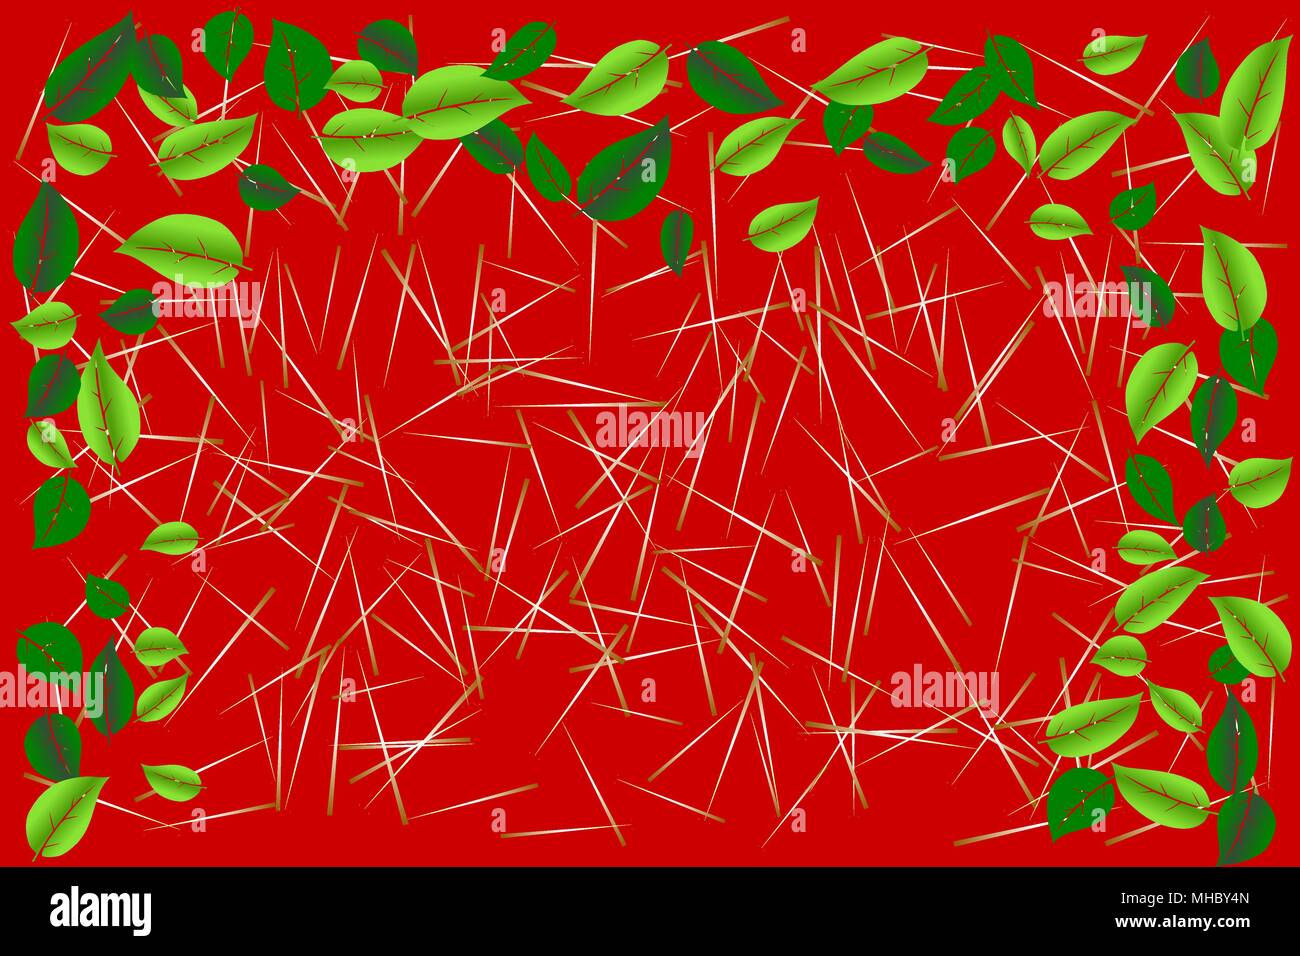 Green leaves border frame over tiny wood sticks textured on red colored background. Vector illustration, EPS 10. Stock Vector